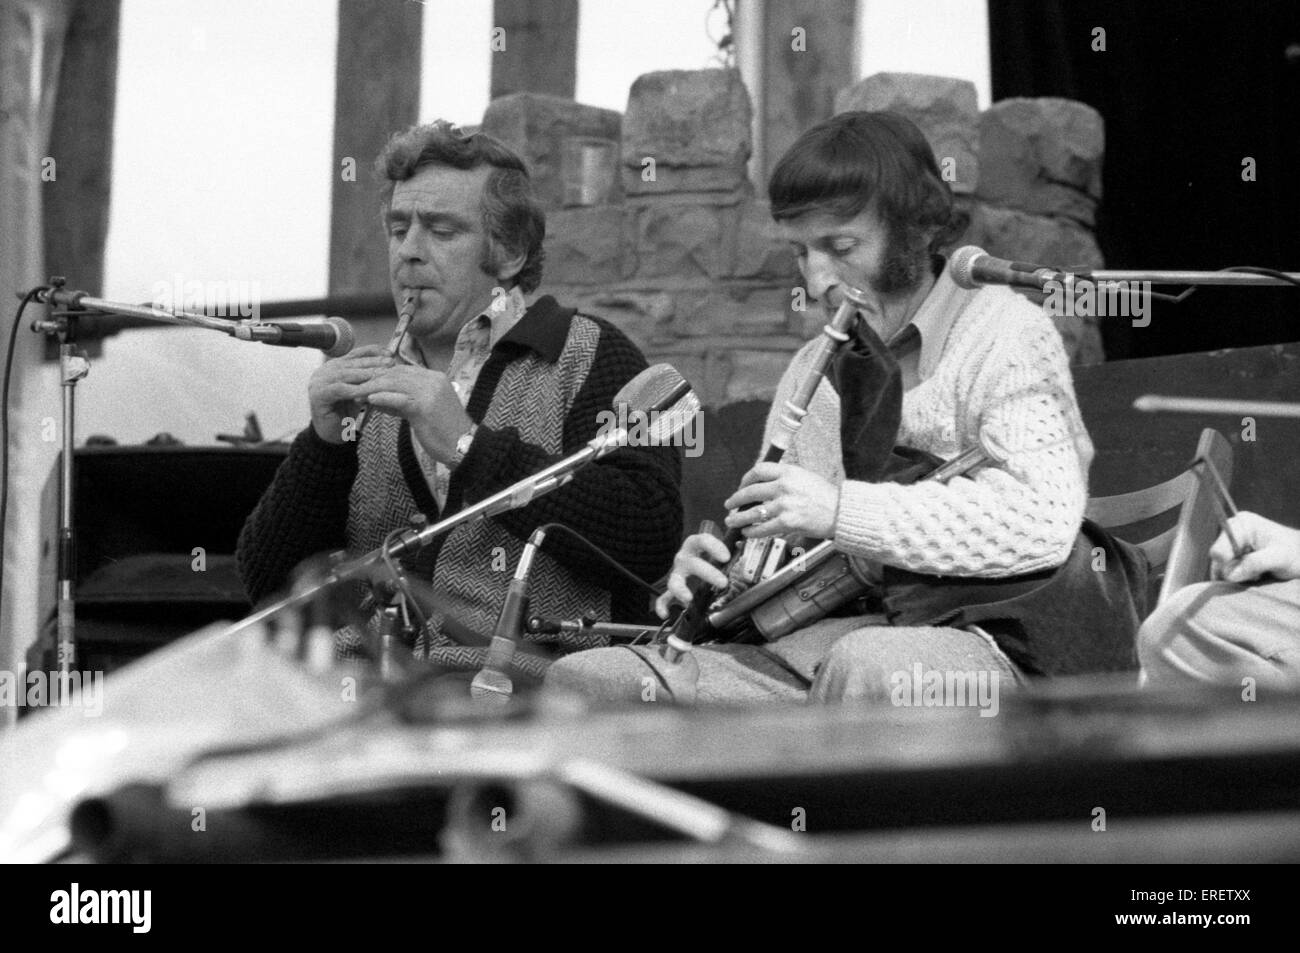 Seán Potts and Paddy Moloney (right) performing with Irish band The Chieftains at the July Wakes folk festival in Chorley, Stock Photo